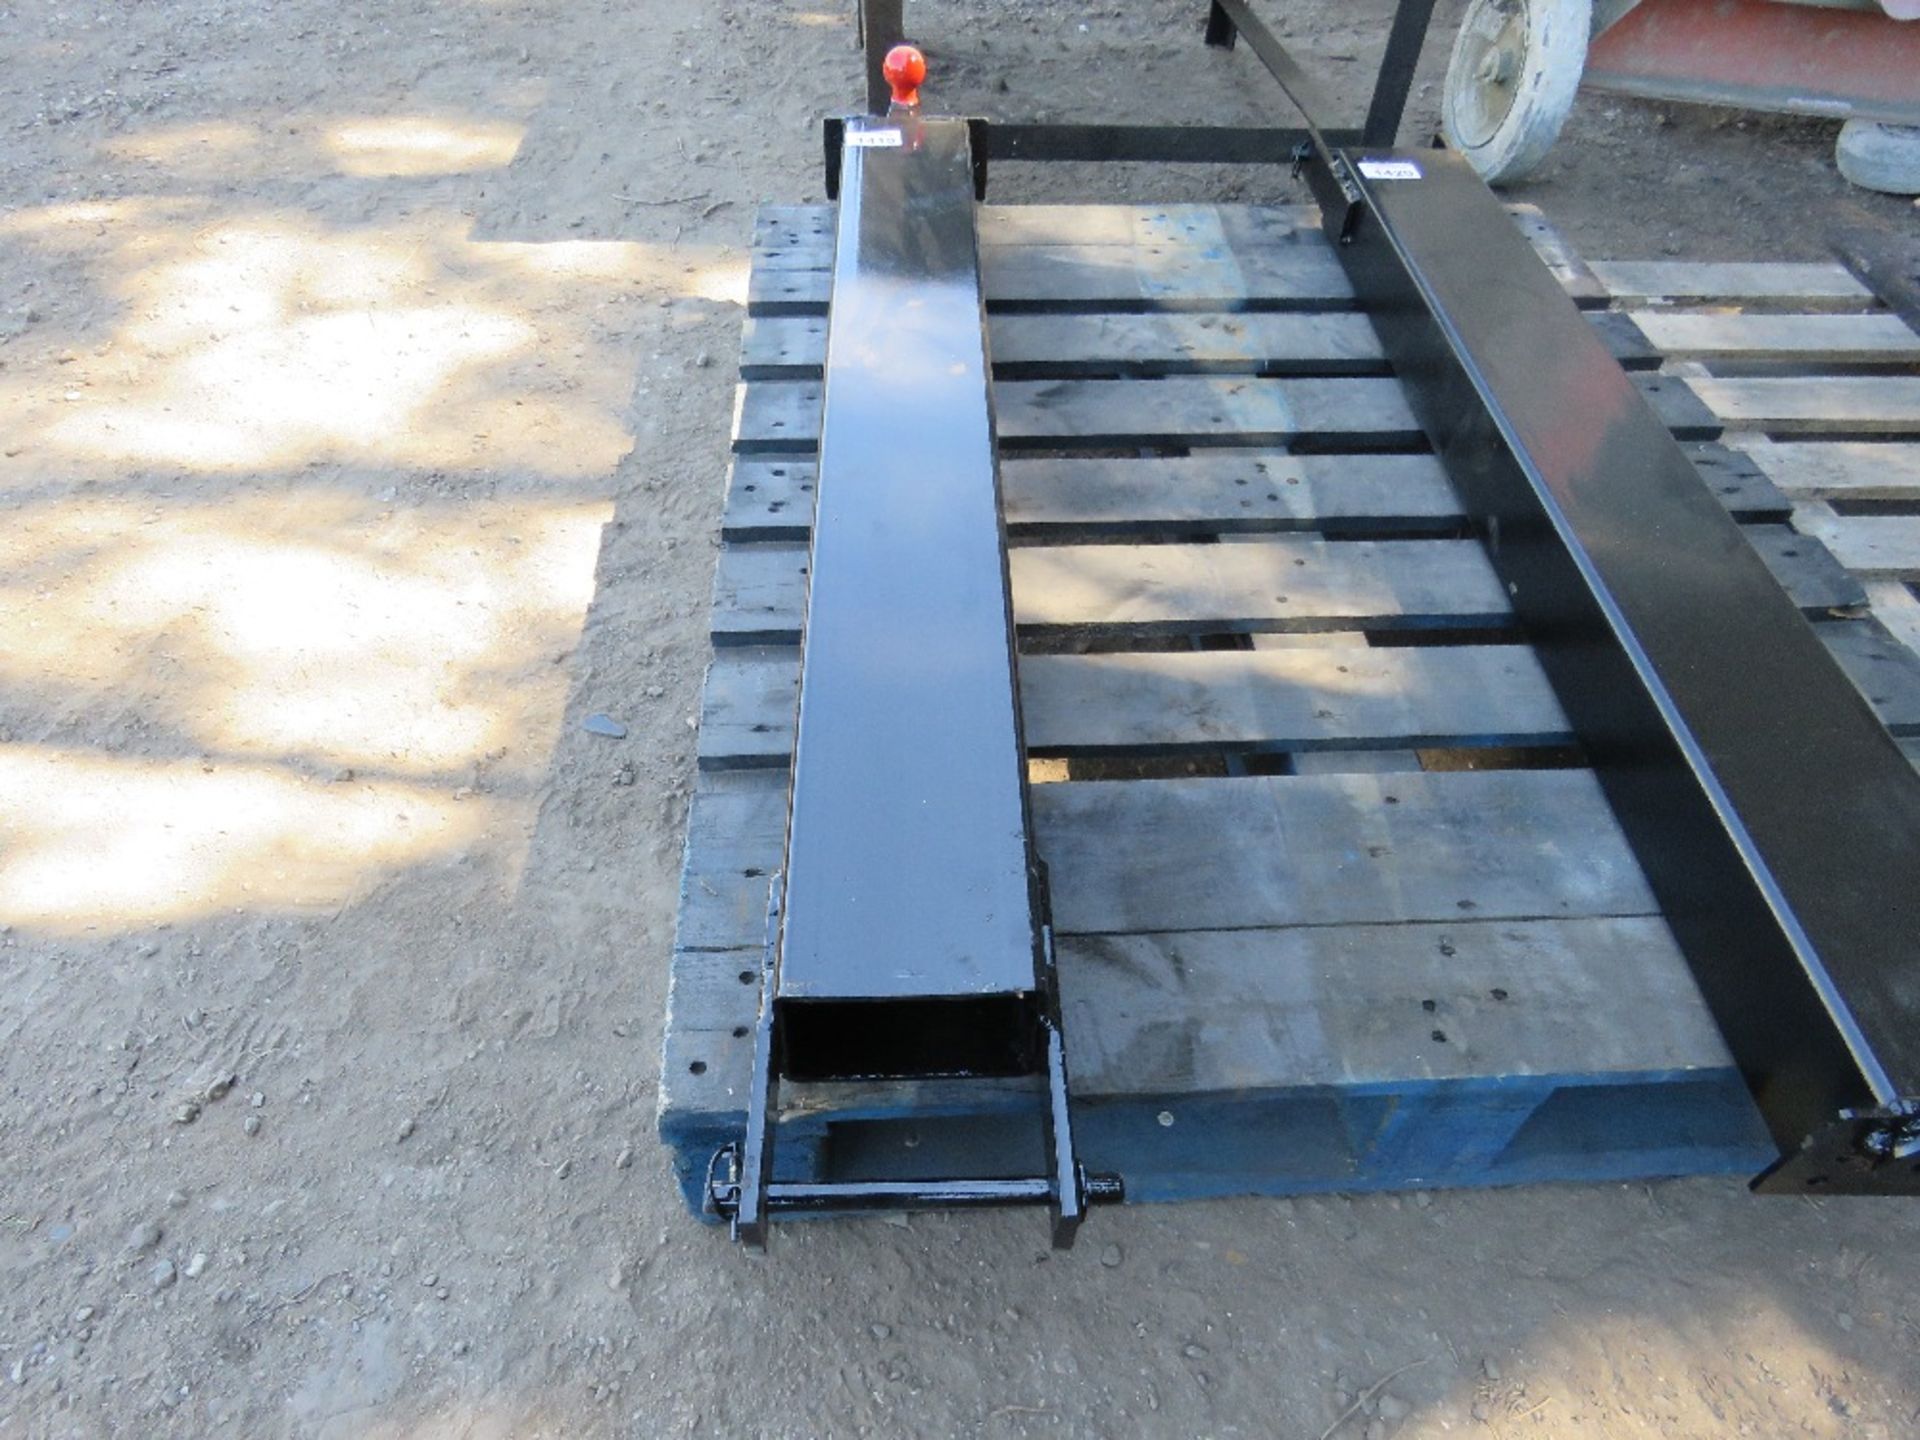 BALL HITCH UNIT FOR FORKLIFT TINE, 4FT LENGTH APPROX. - Image 2 of 2